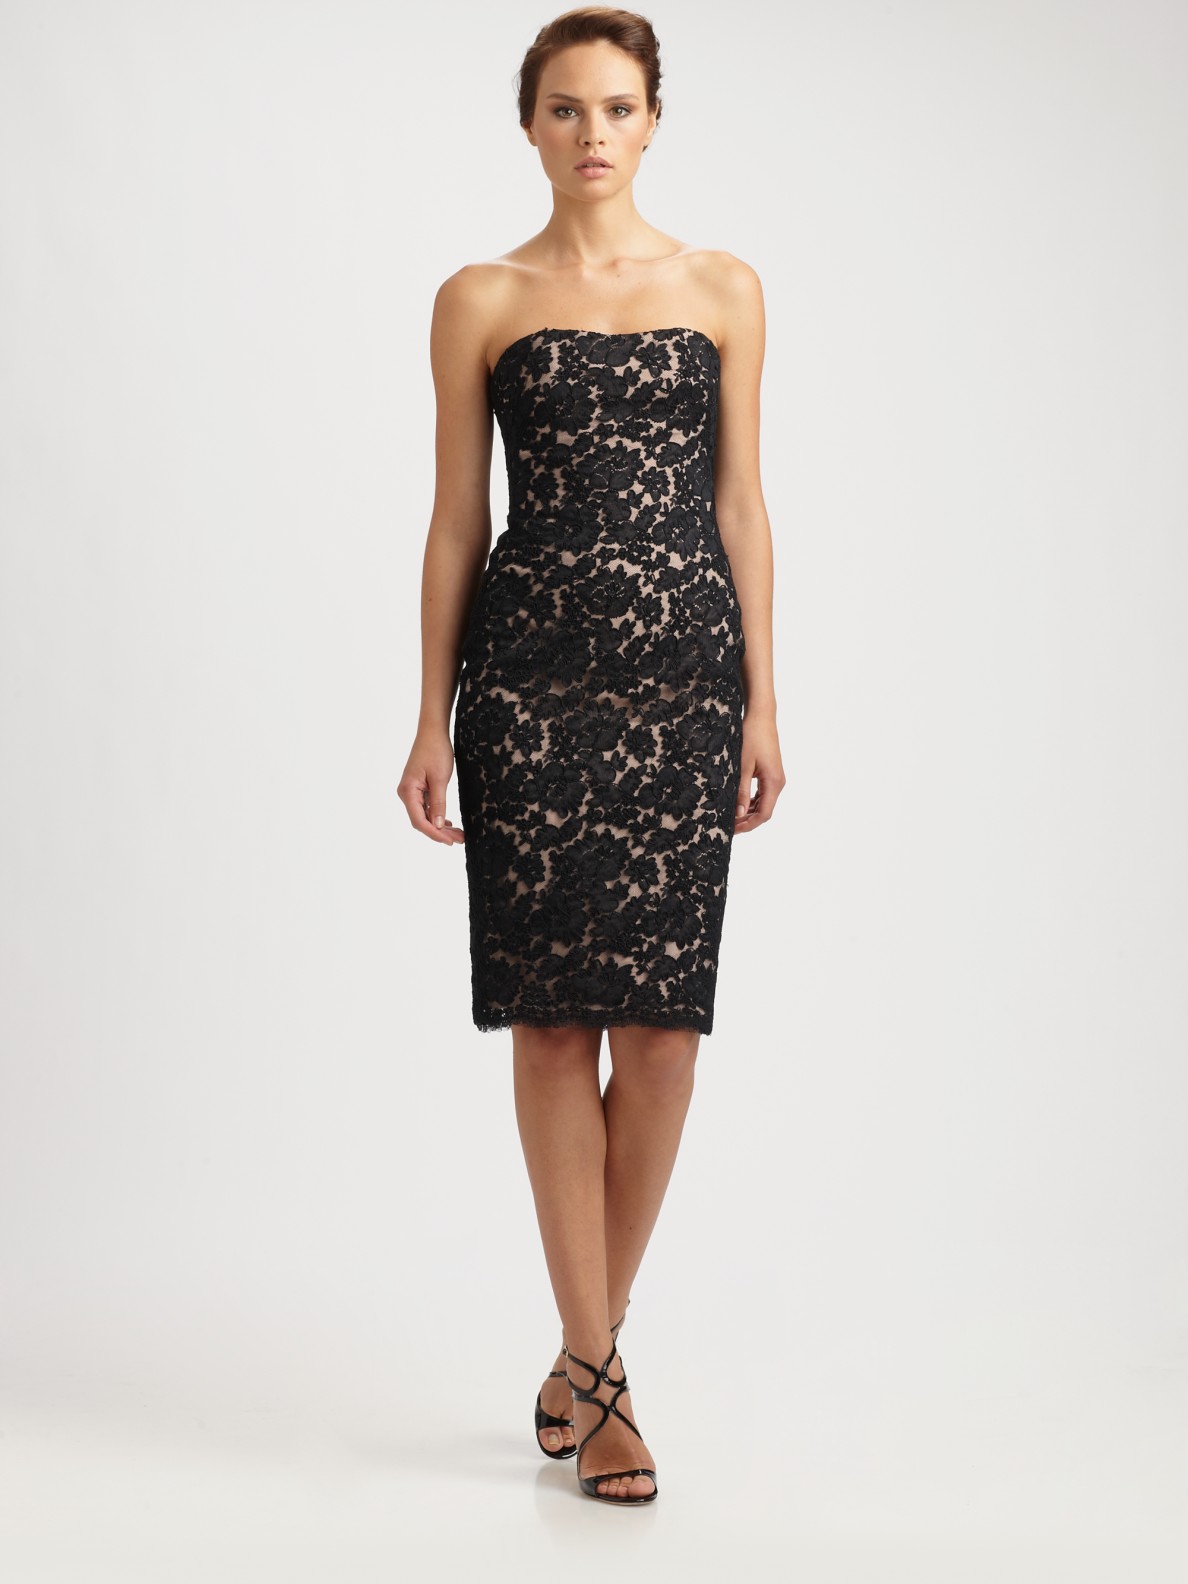 Lyst - Notte By Marchesa Strapless Lace Cocktail Dress in Black